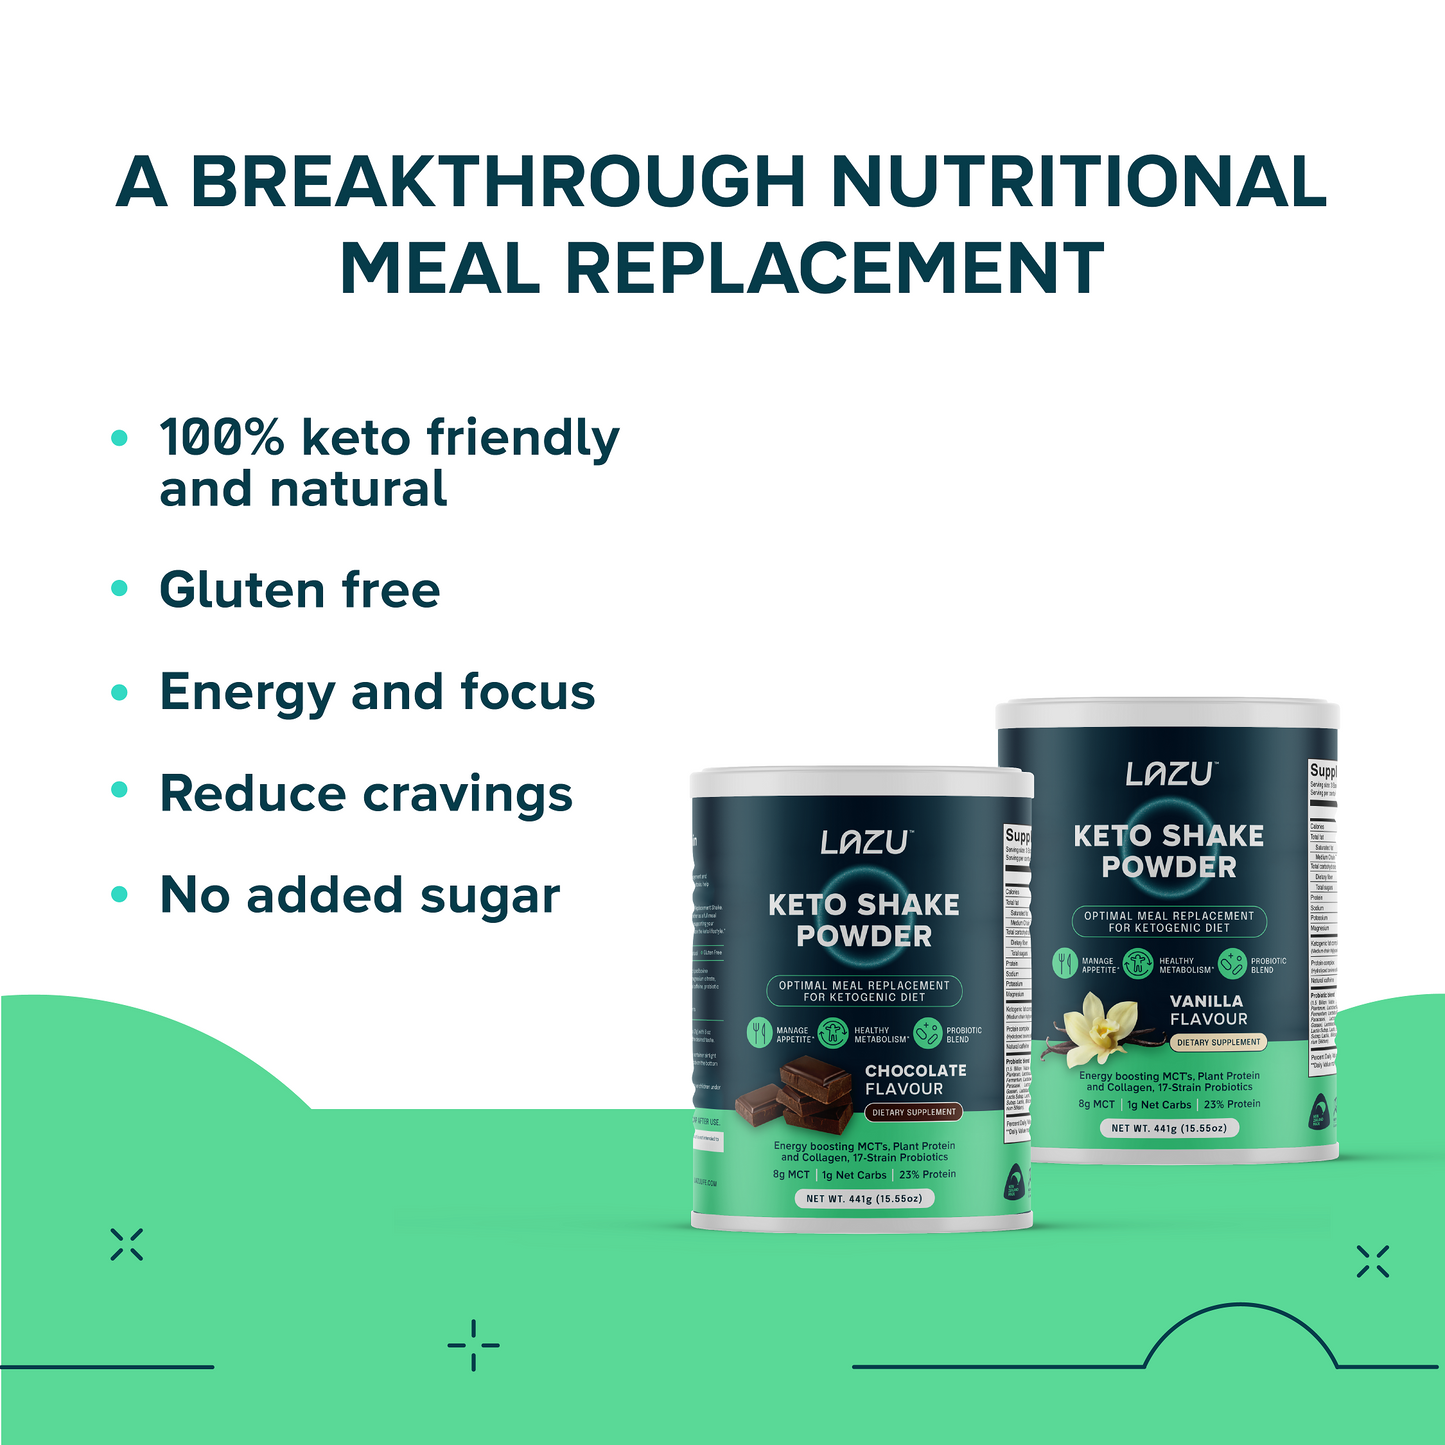 KETO SHAKE - Optimal meal replacement for Ketogenic diets